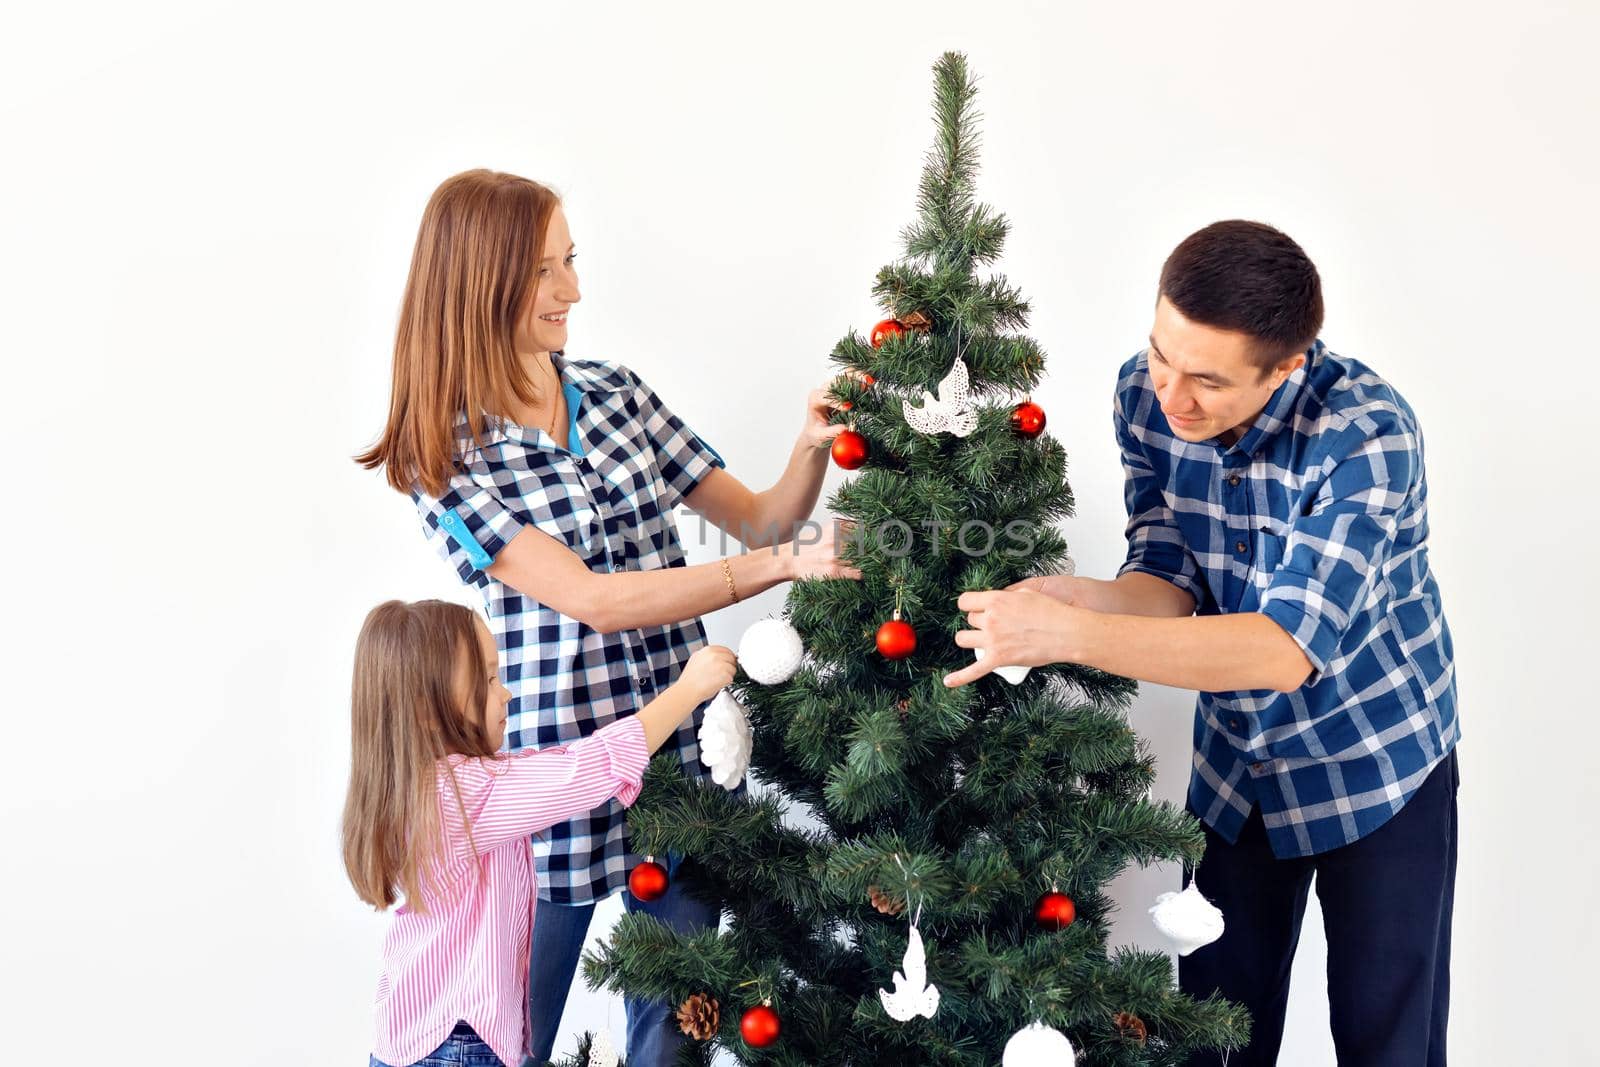 Holidays, parents and celebrating concept - Happy family decorating a Christmas tree with baubles in the living-room on white background by Satura86